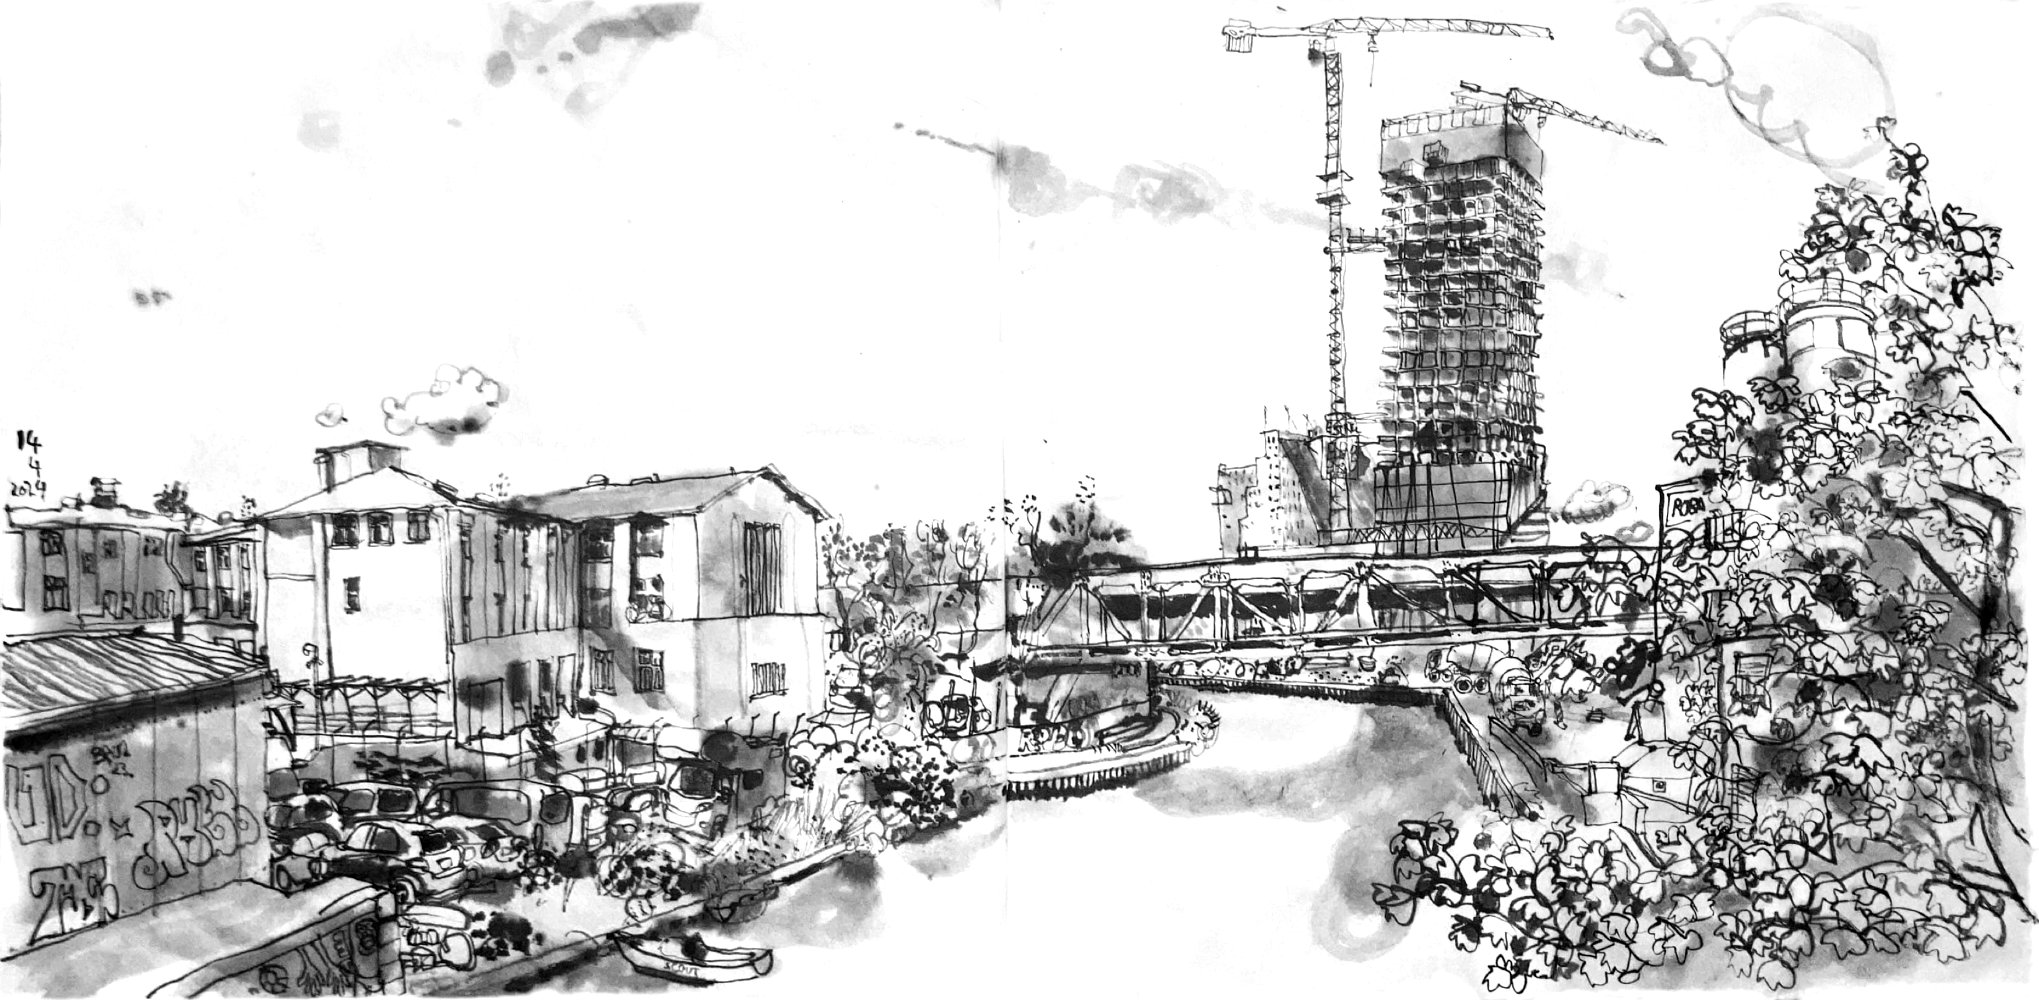 Ink drawing of a canal, one to three store buildings on the left bank, lots of cars beneath them,two railway bridges in front, railway tracks underneath on the left bank, on the right bank some concrete mixer trucks, silos and other buildings hidden behind a tree. In the back behind the railway bridges is a high rise building under construction. Two small dinghies in the canal, moored to the left bank.